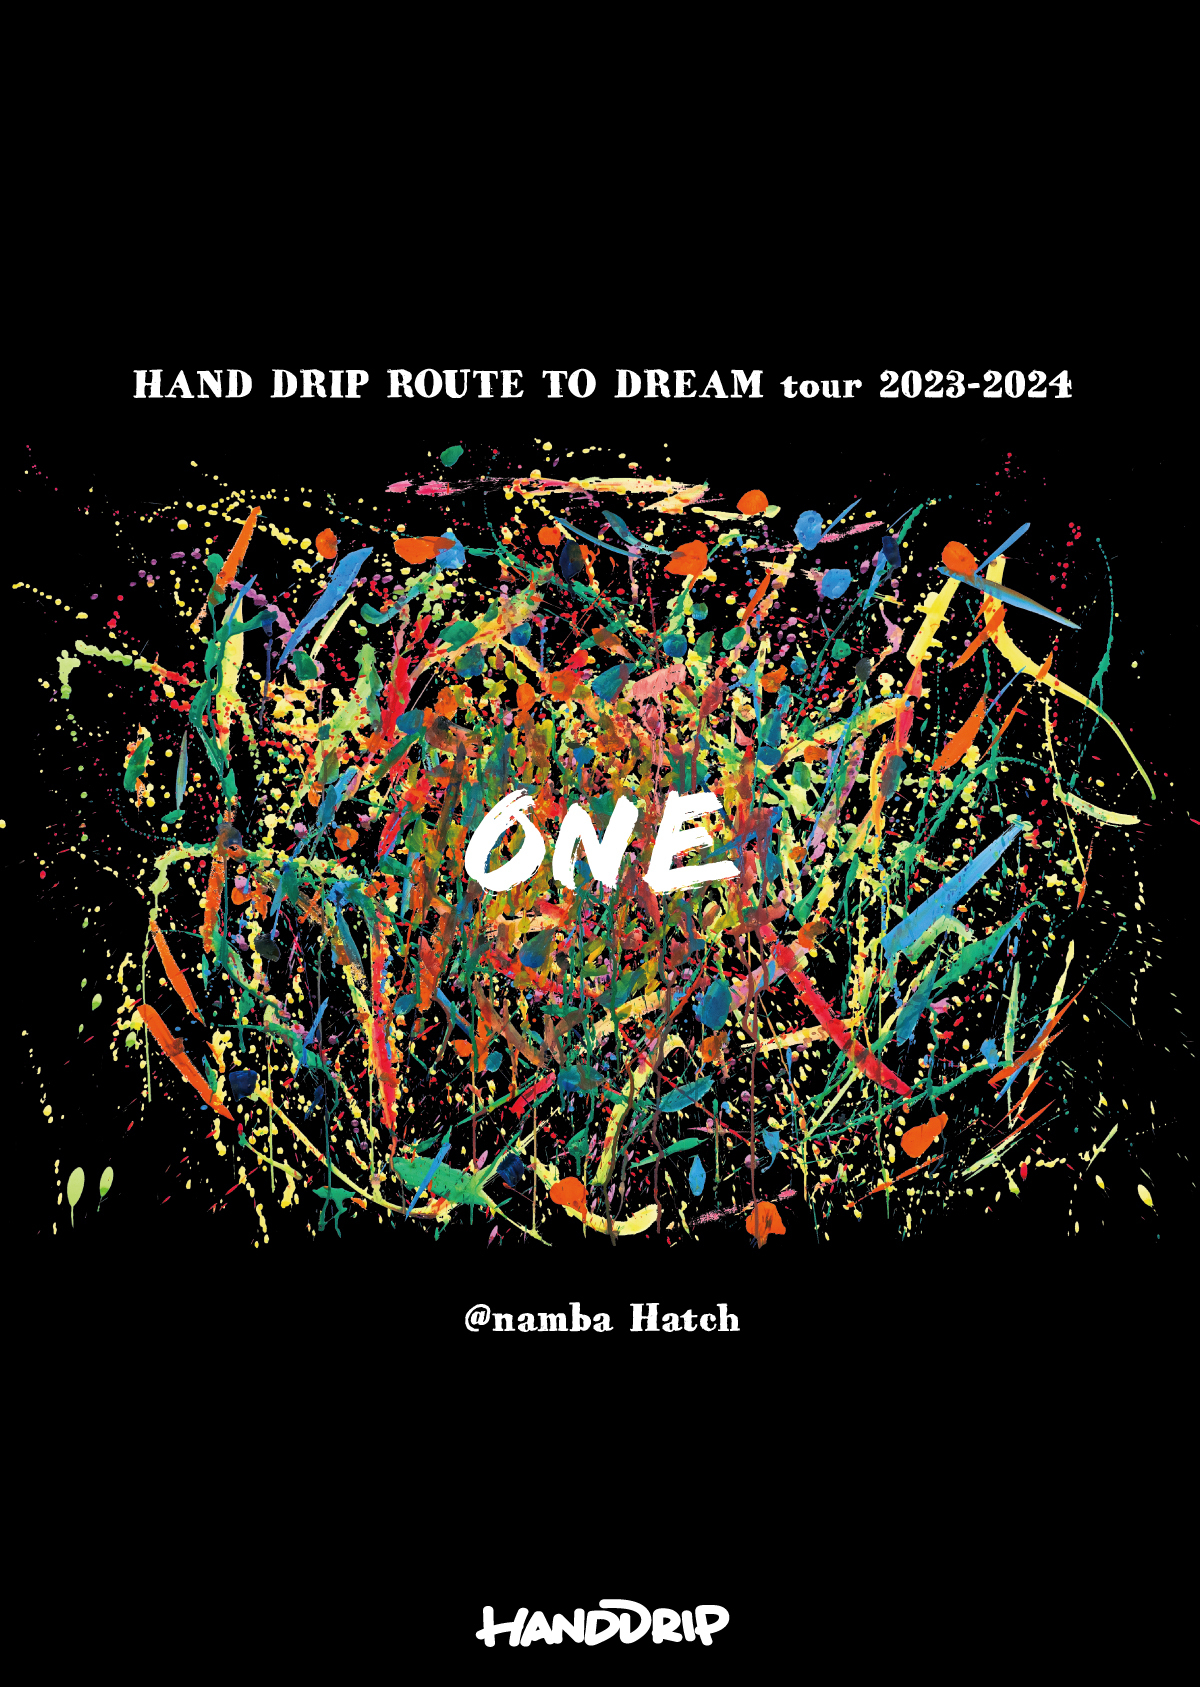 「HAND DRIP ROUTE TO DREAM tour 2023-2024 ～ONE～ @namba Hatch」LIVE DVD